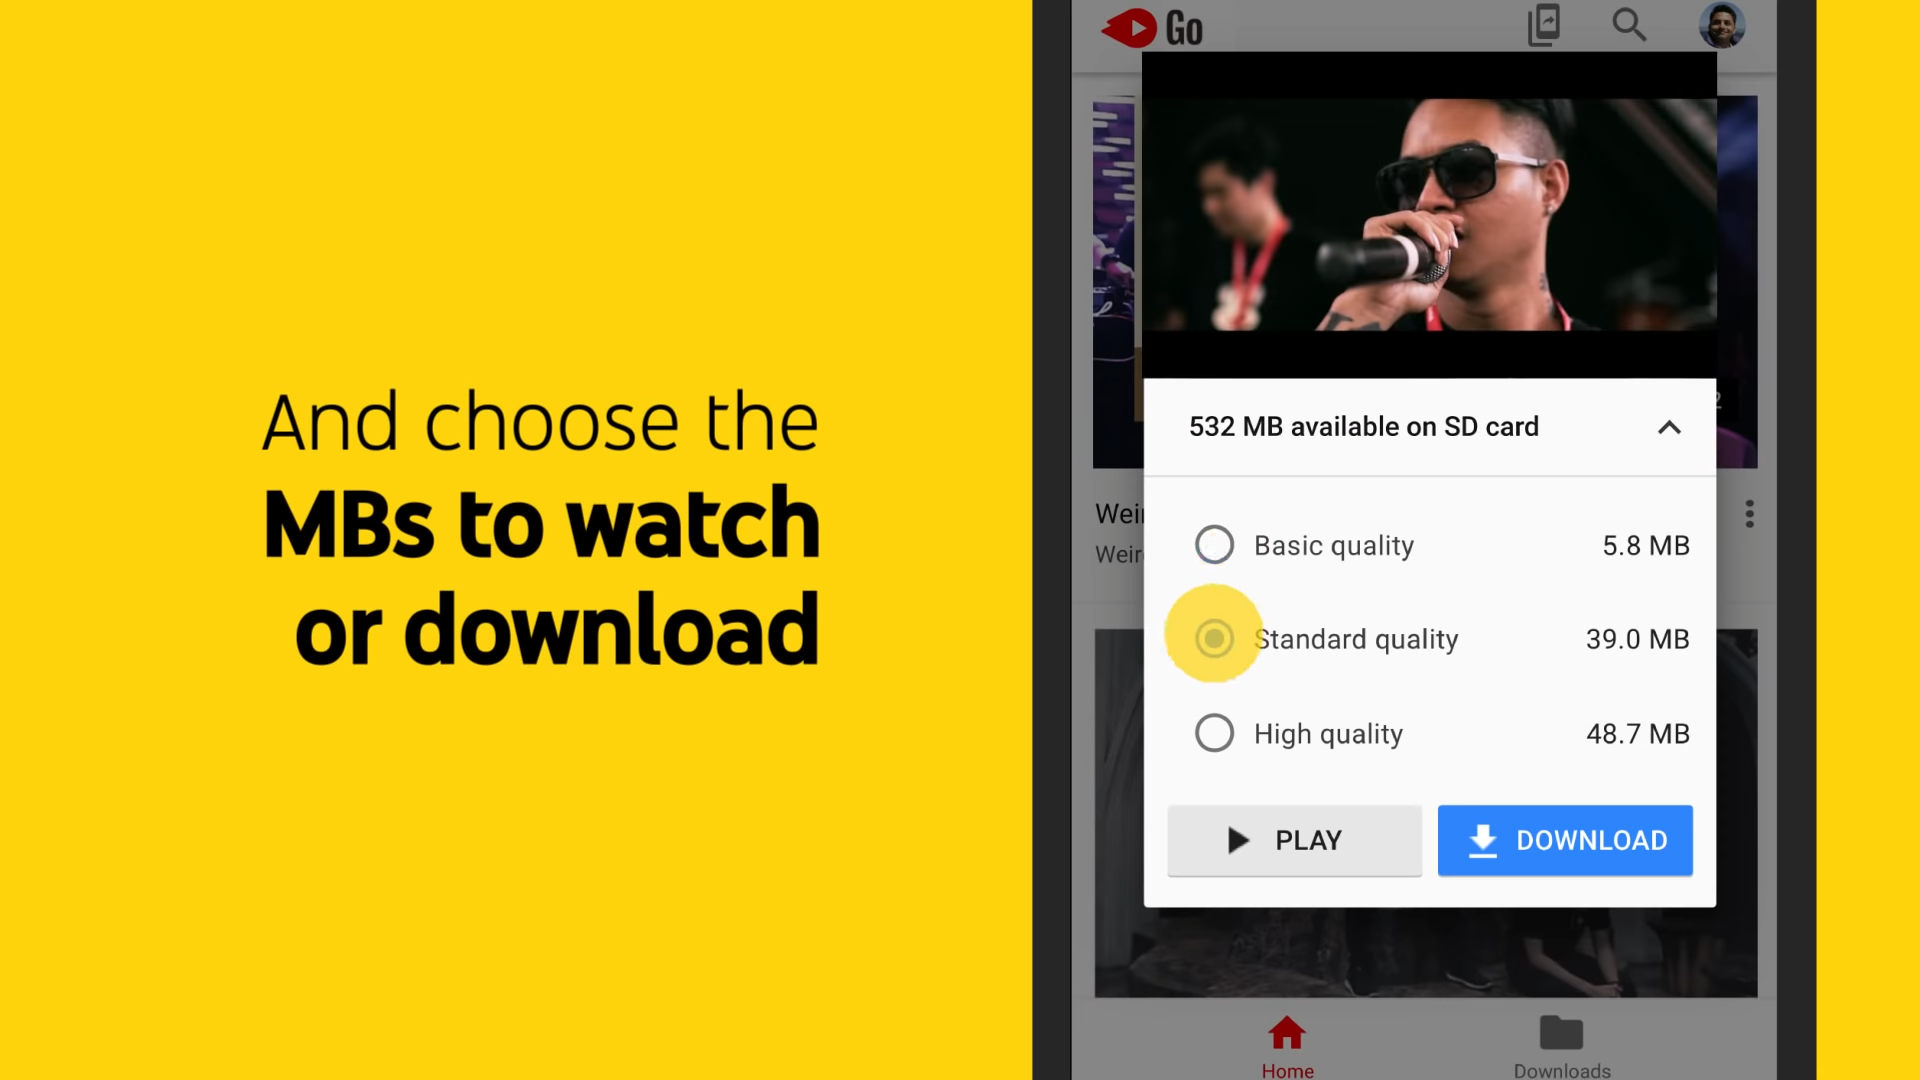 YouTube Go could download videos for free, but now you